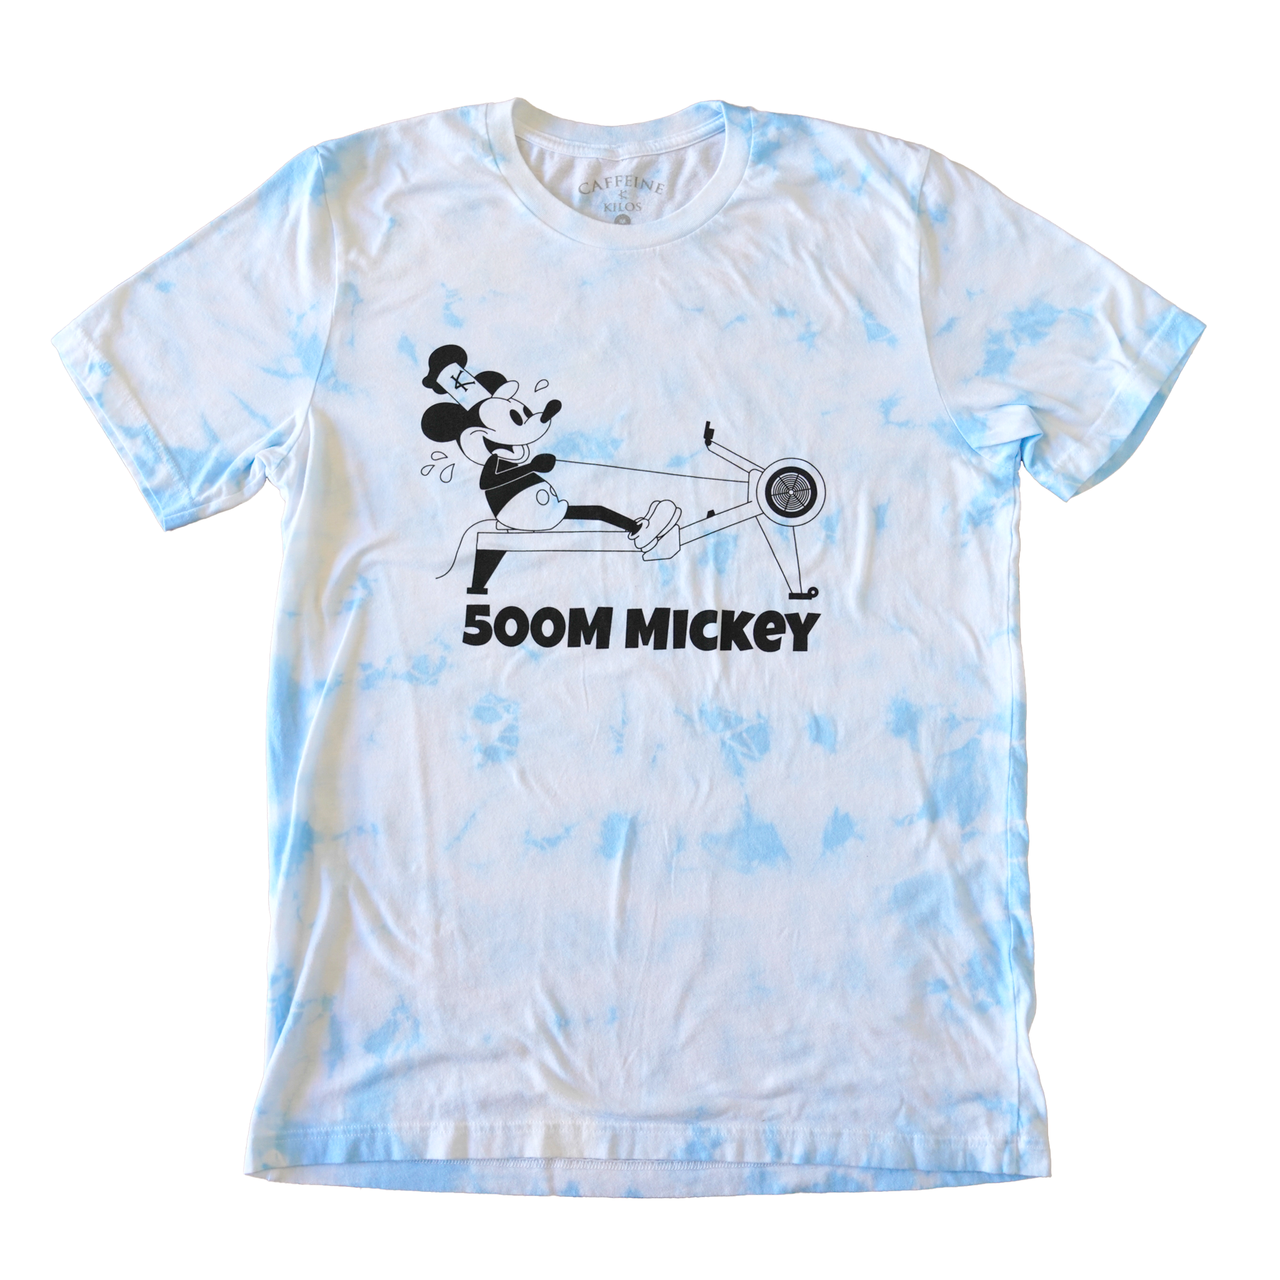 500M Mickey Tee - Outlet